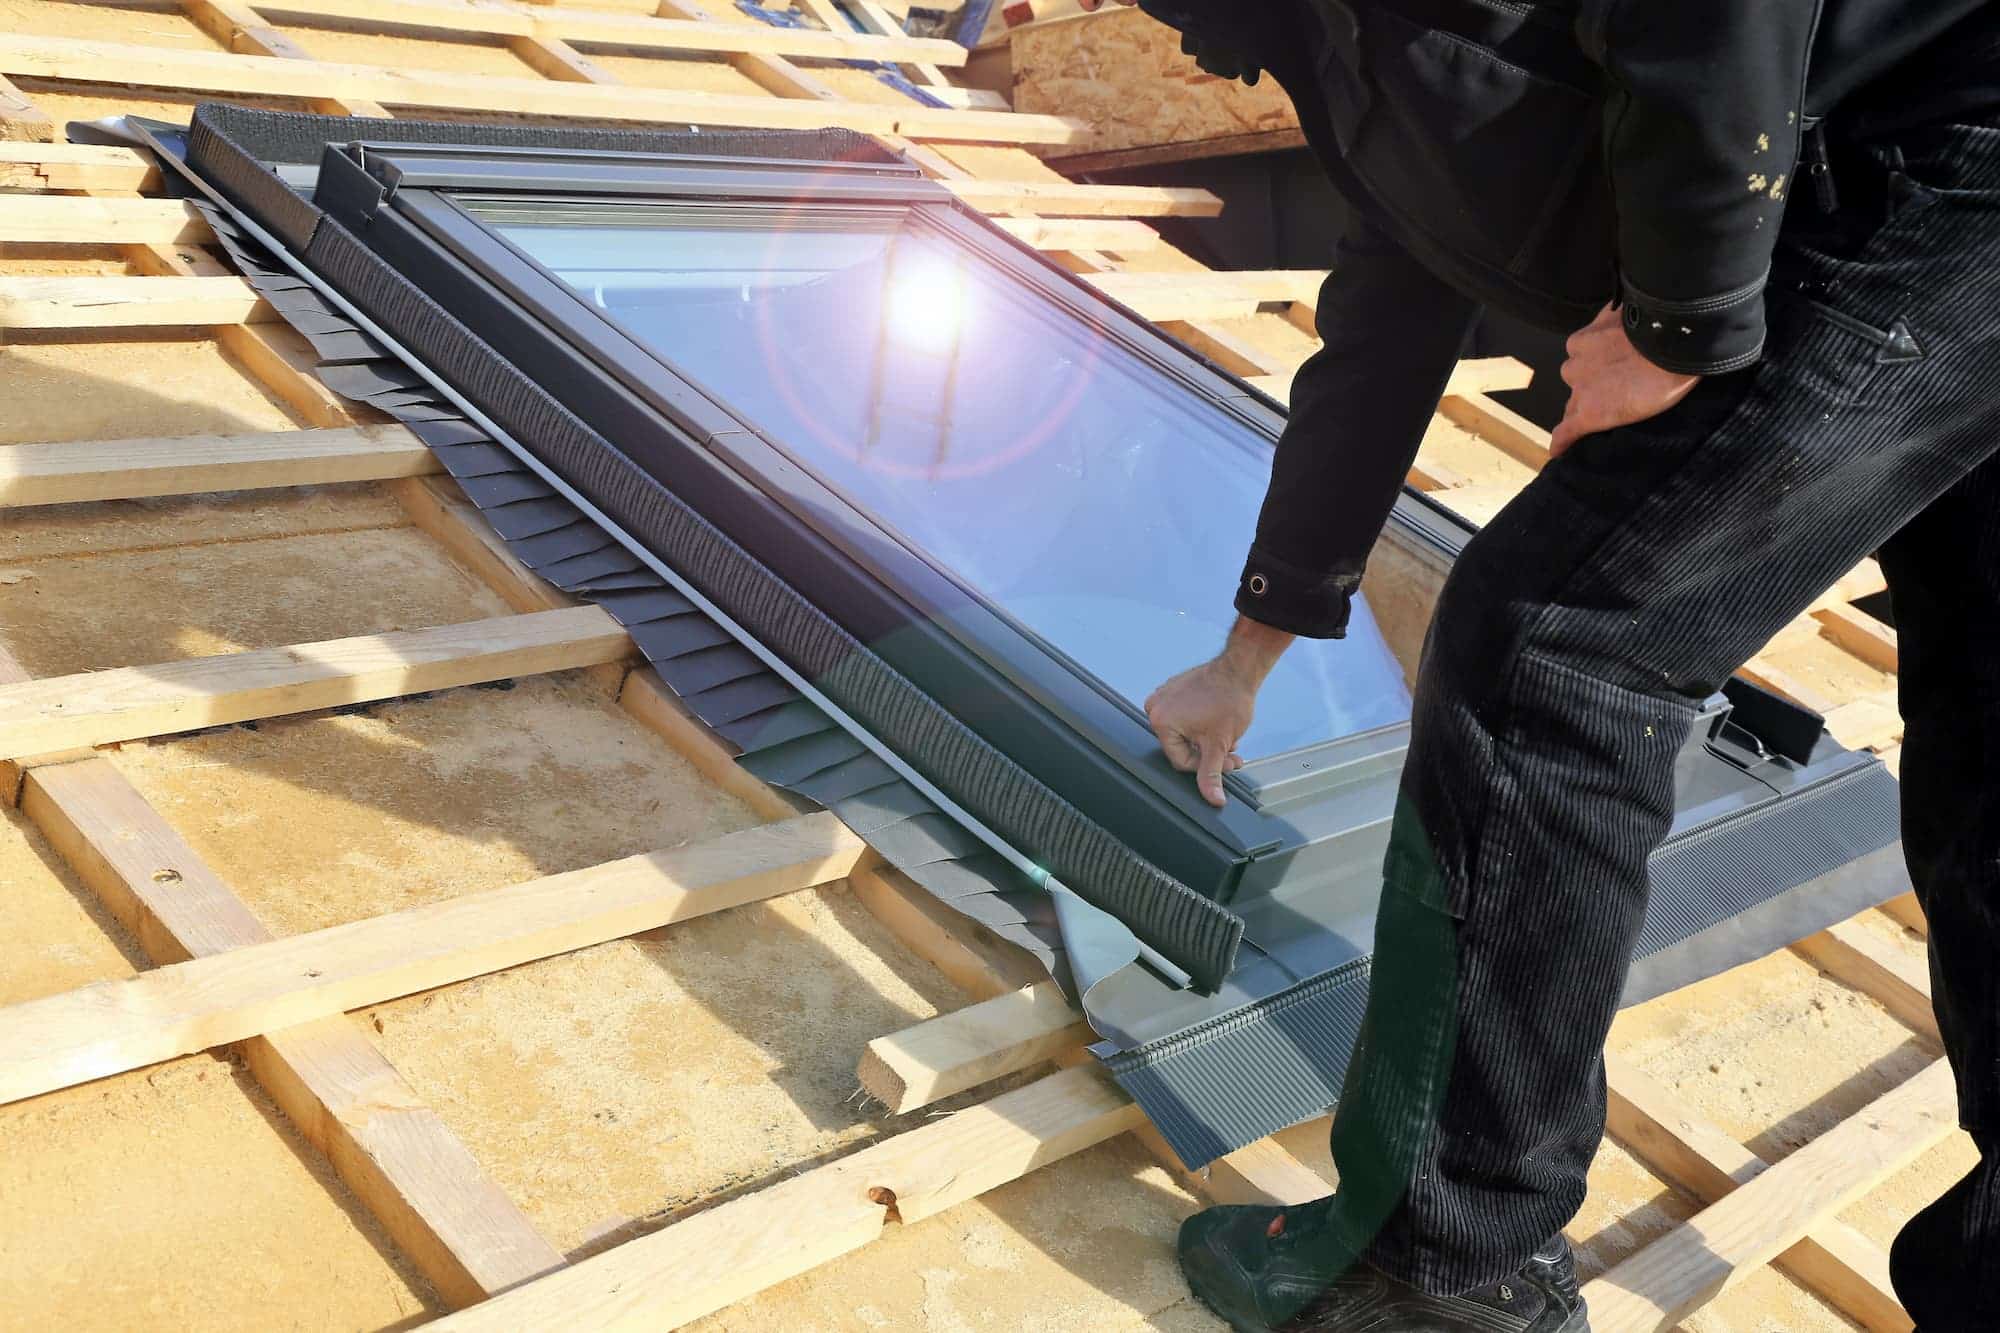 Looking at Installing a Skylight? Find Skylight Repairs and Installation Services at BLC Roofing